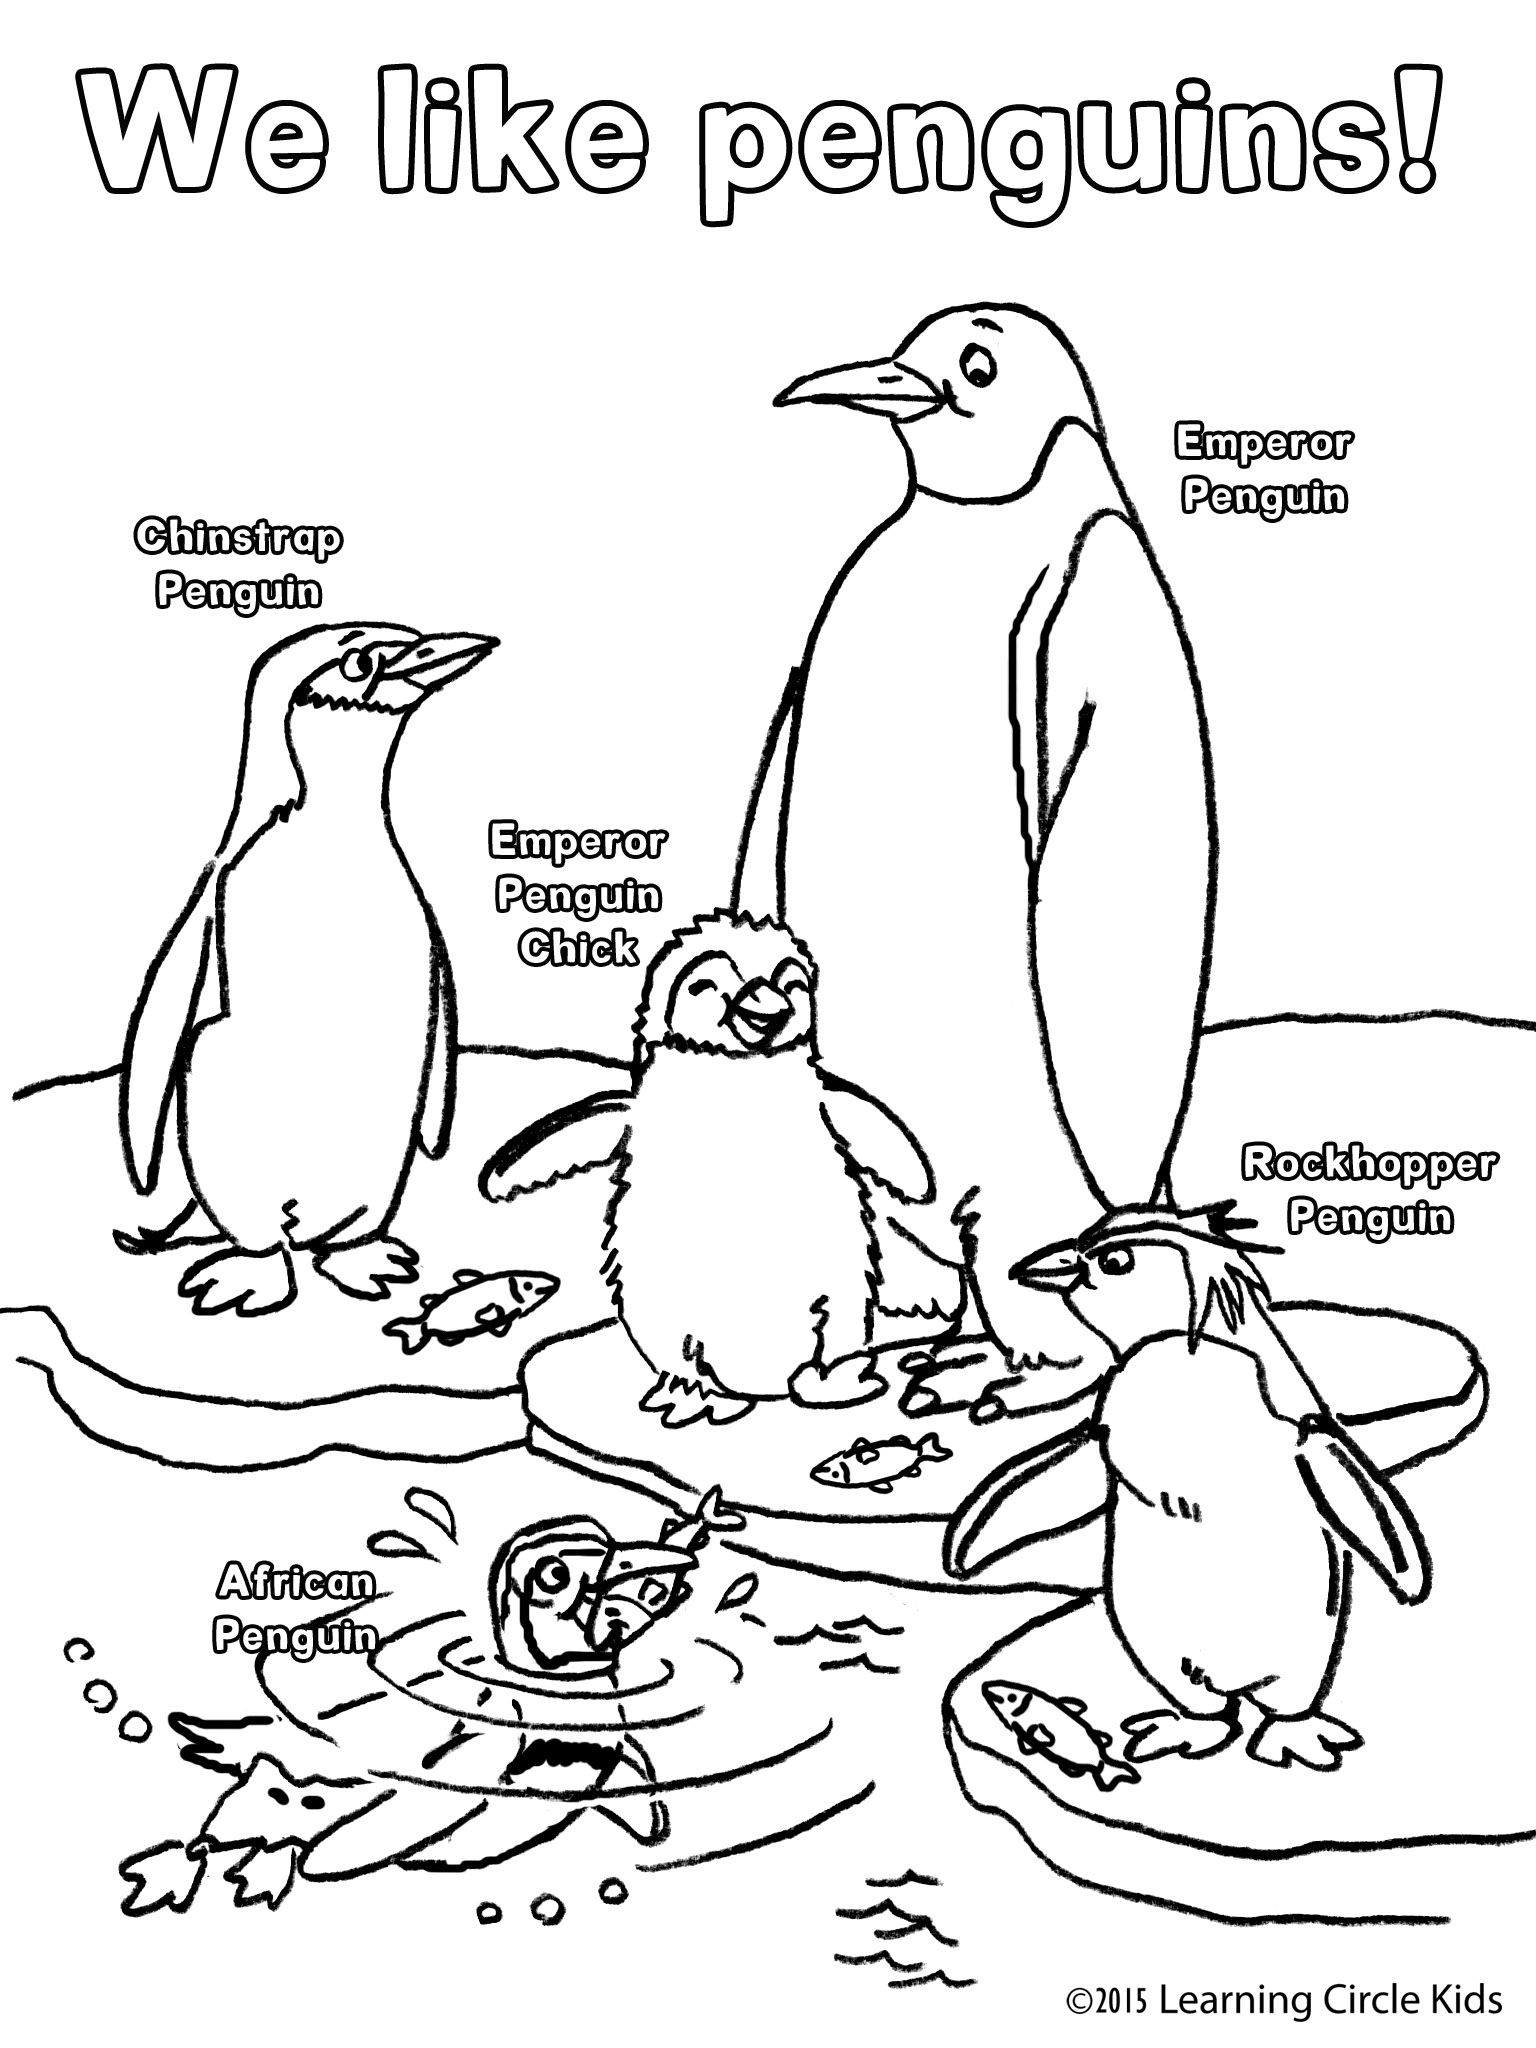 Free penguin coloring page from httpreaderbee penguins kindergarten penguin coloring pages penguin worksheets